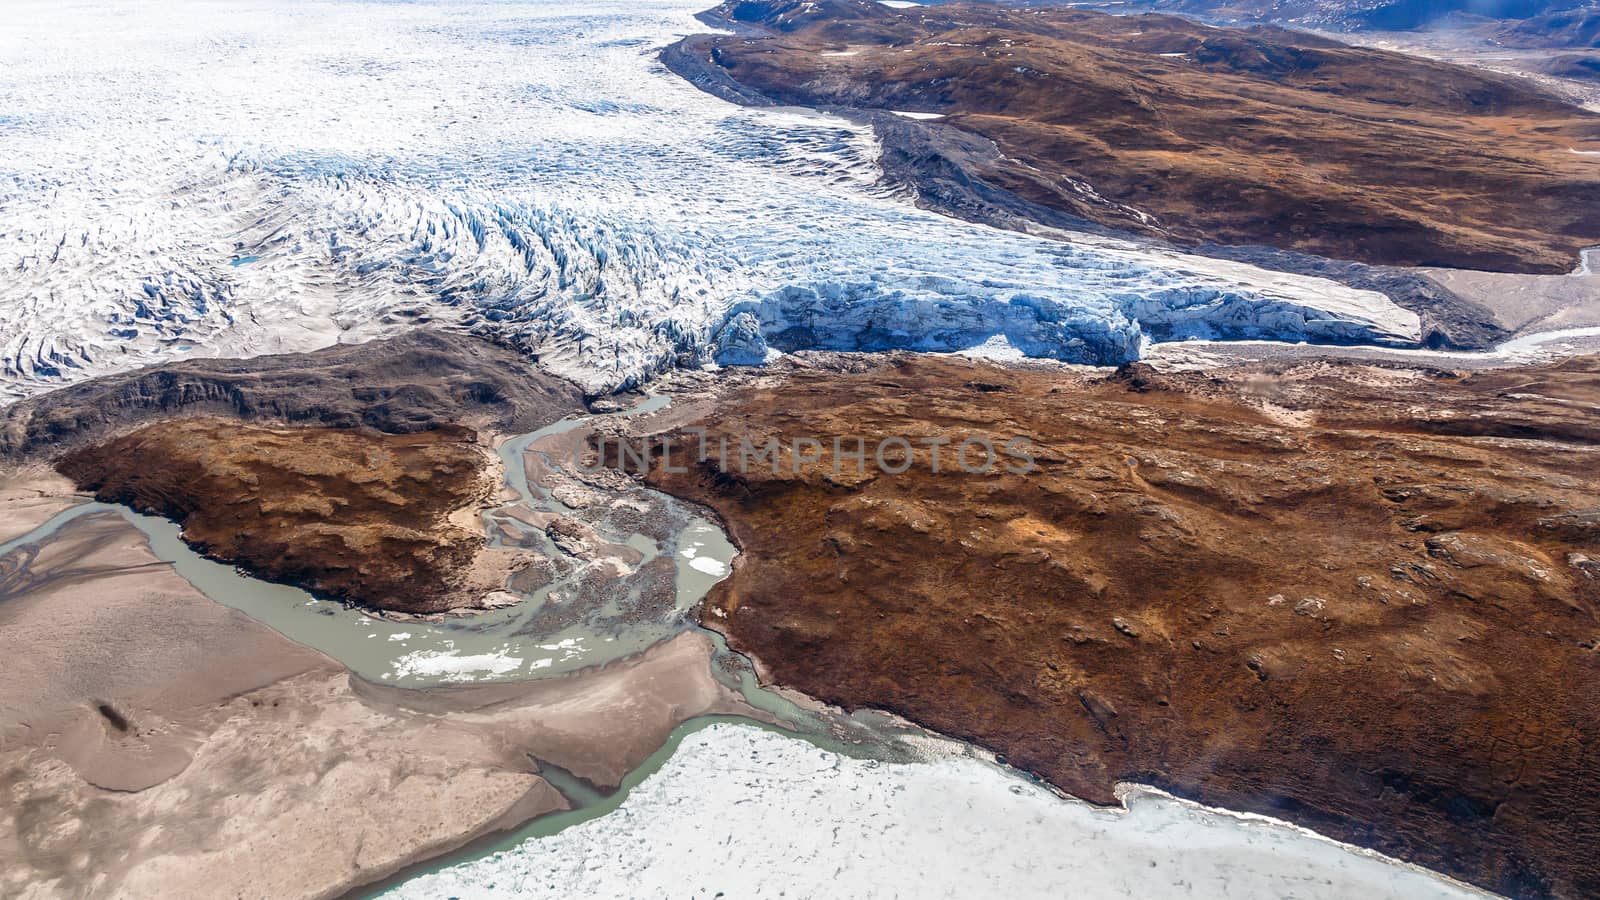 Greenlandic ice sheet melting glacier into river with tundra aer by ambeon